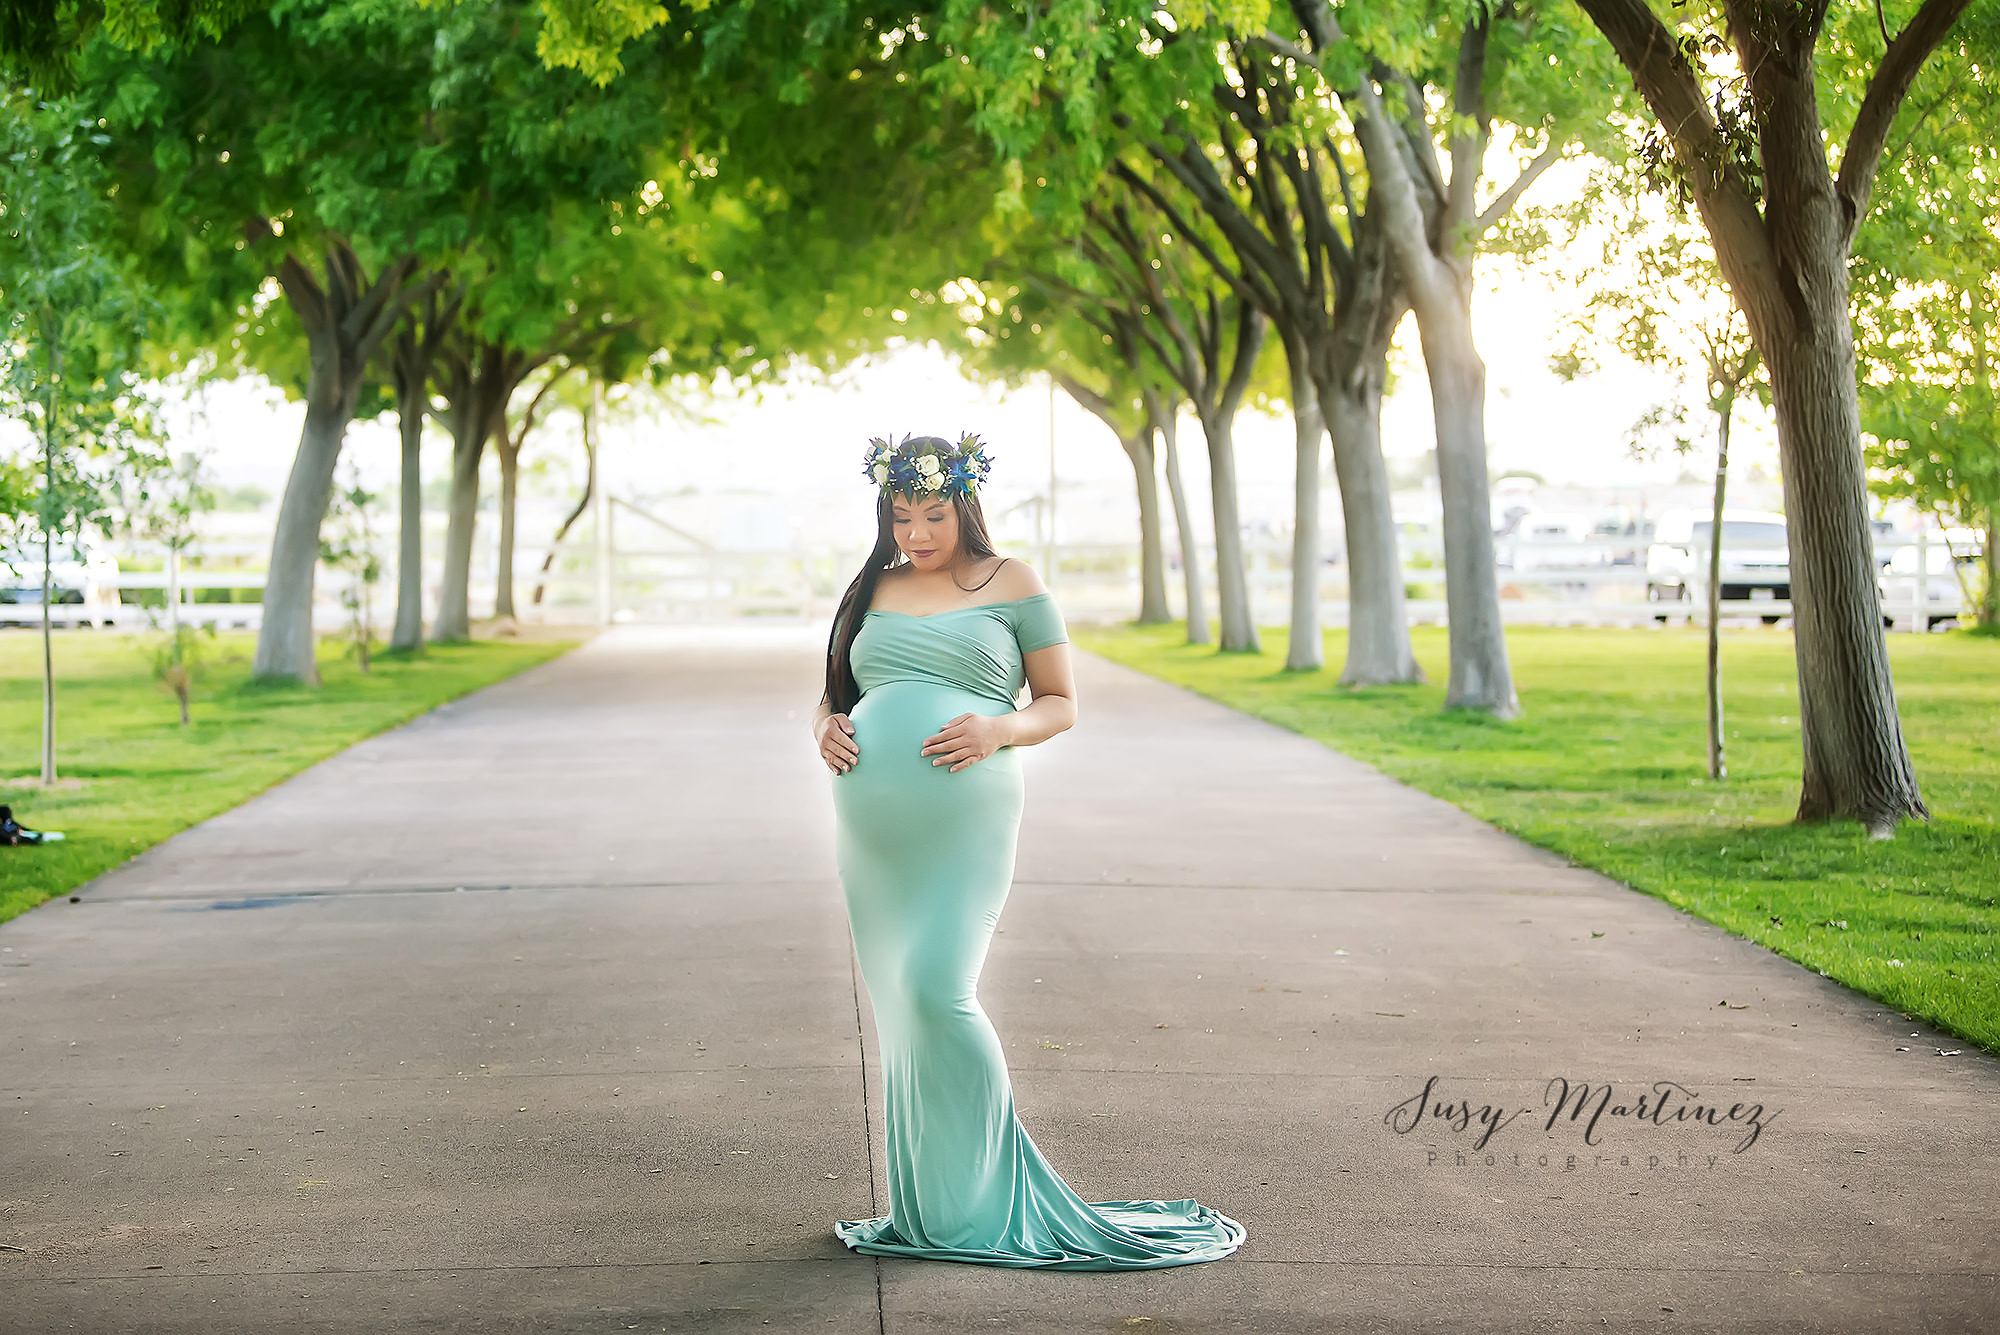 Nevada maternity session in Clark County Park photographed by Susy Martinez Photography